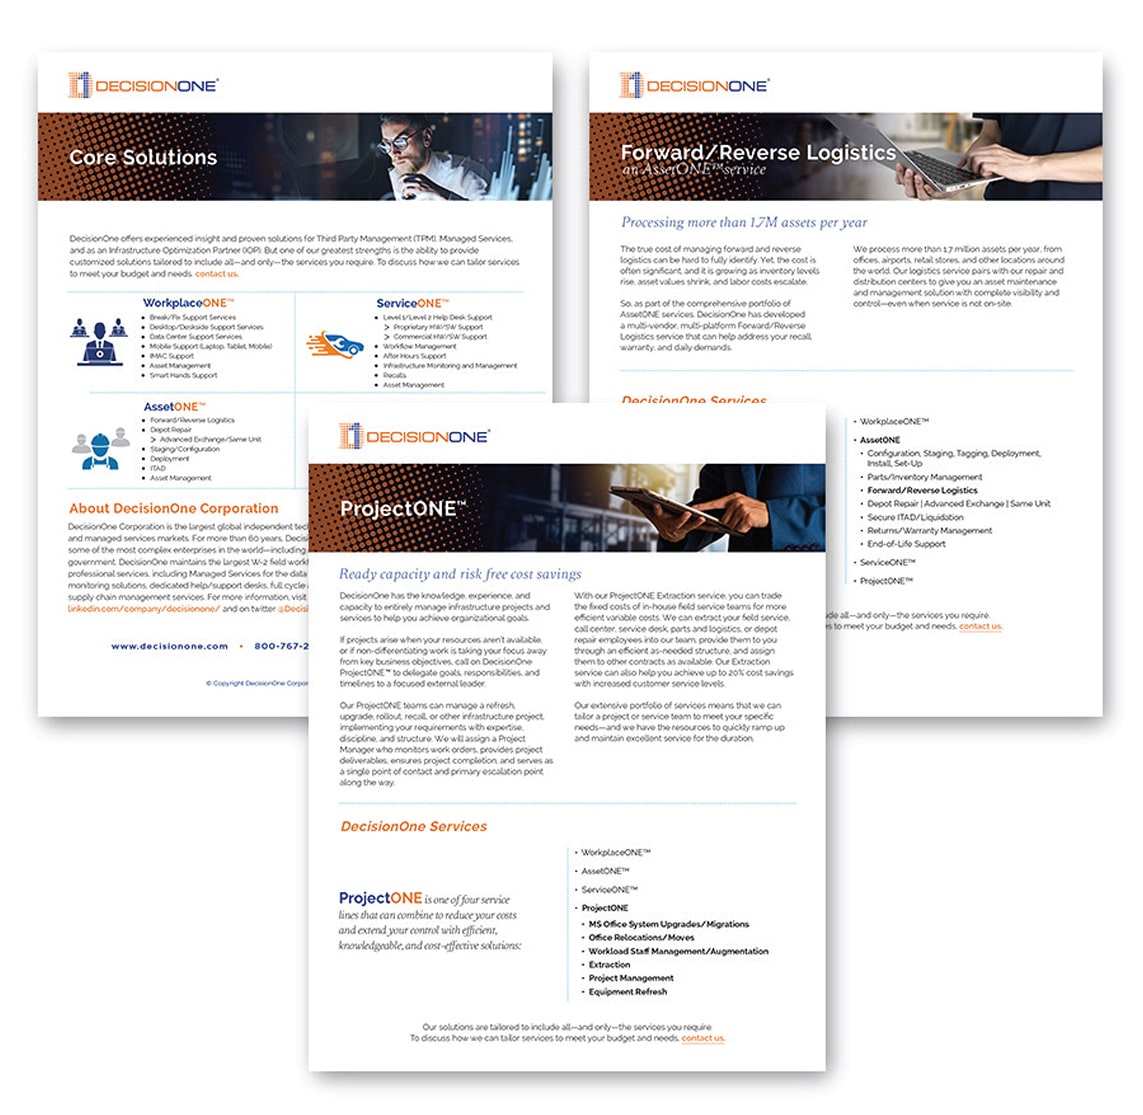 DecisionOne White Papers and Other Collateral